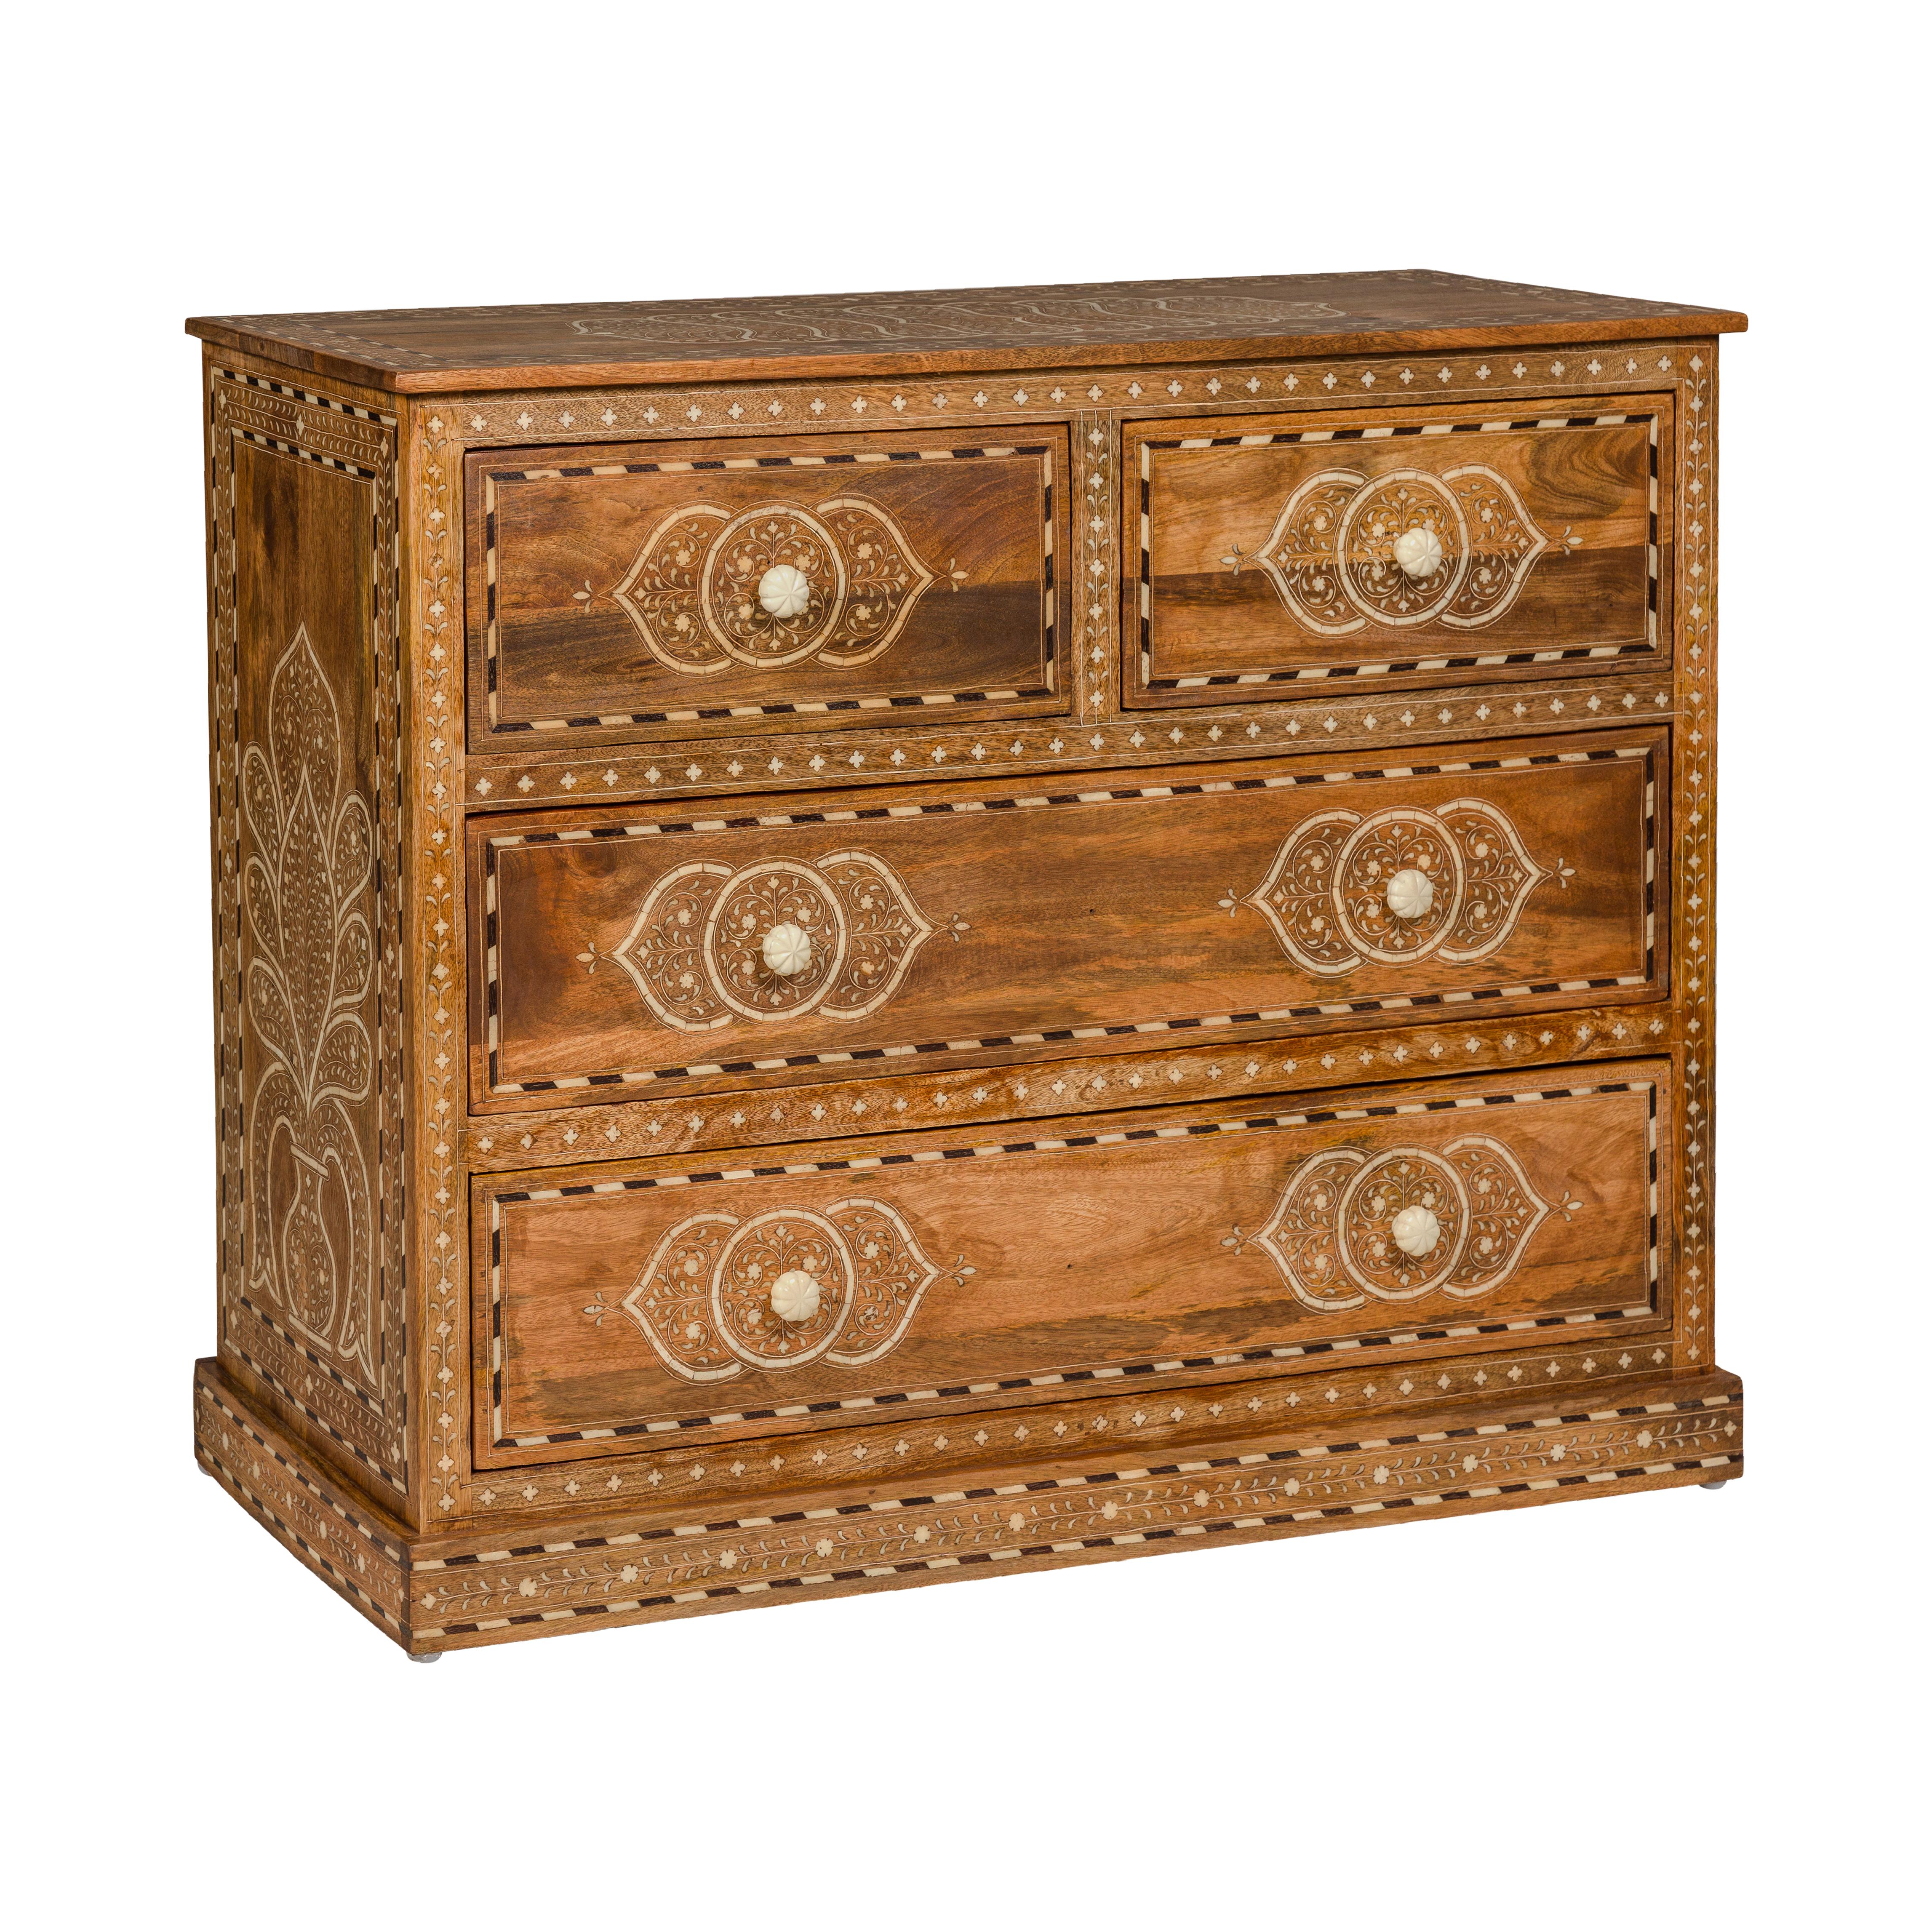 Anglo Indian Style Mango Wood Chest with Four Drawers and Floral Bone Inlay For Sale 13